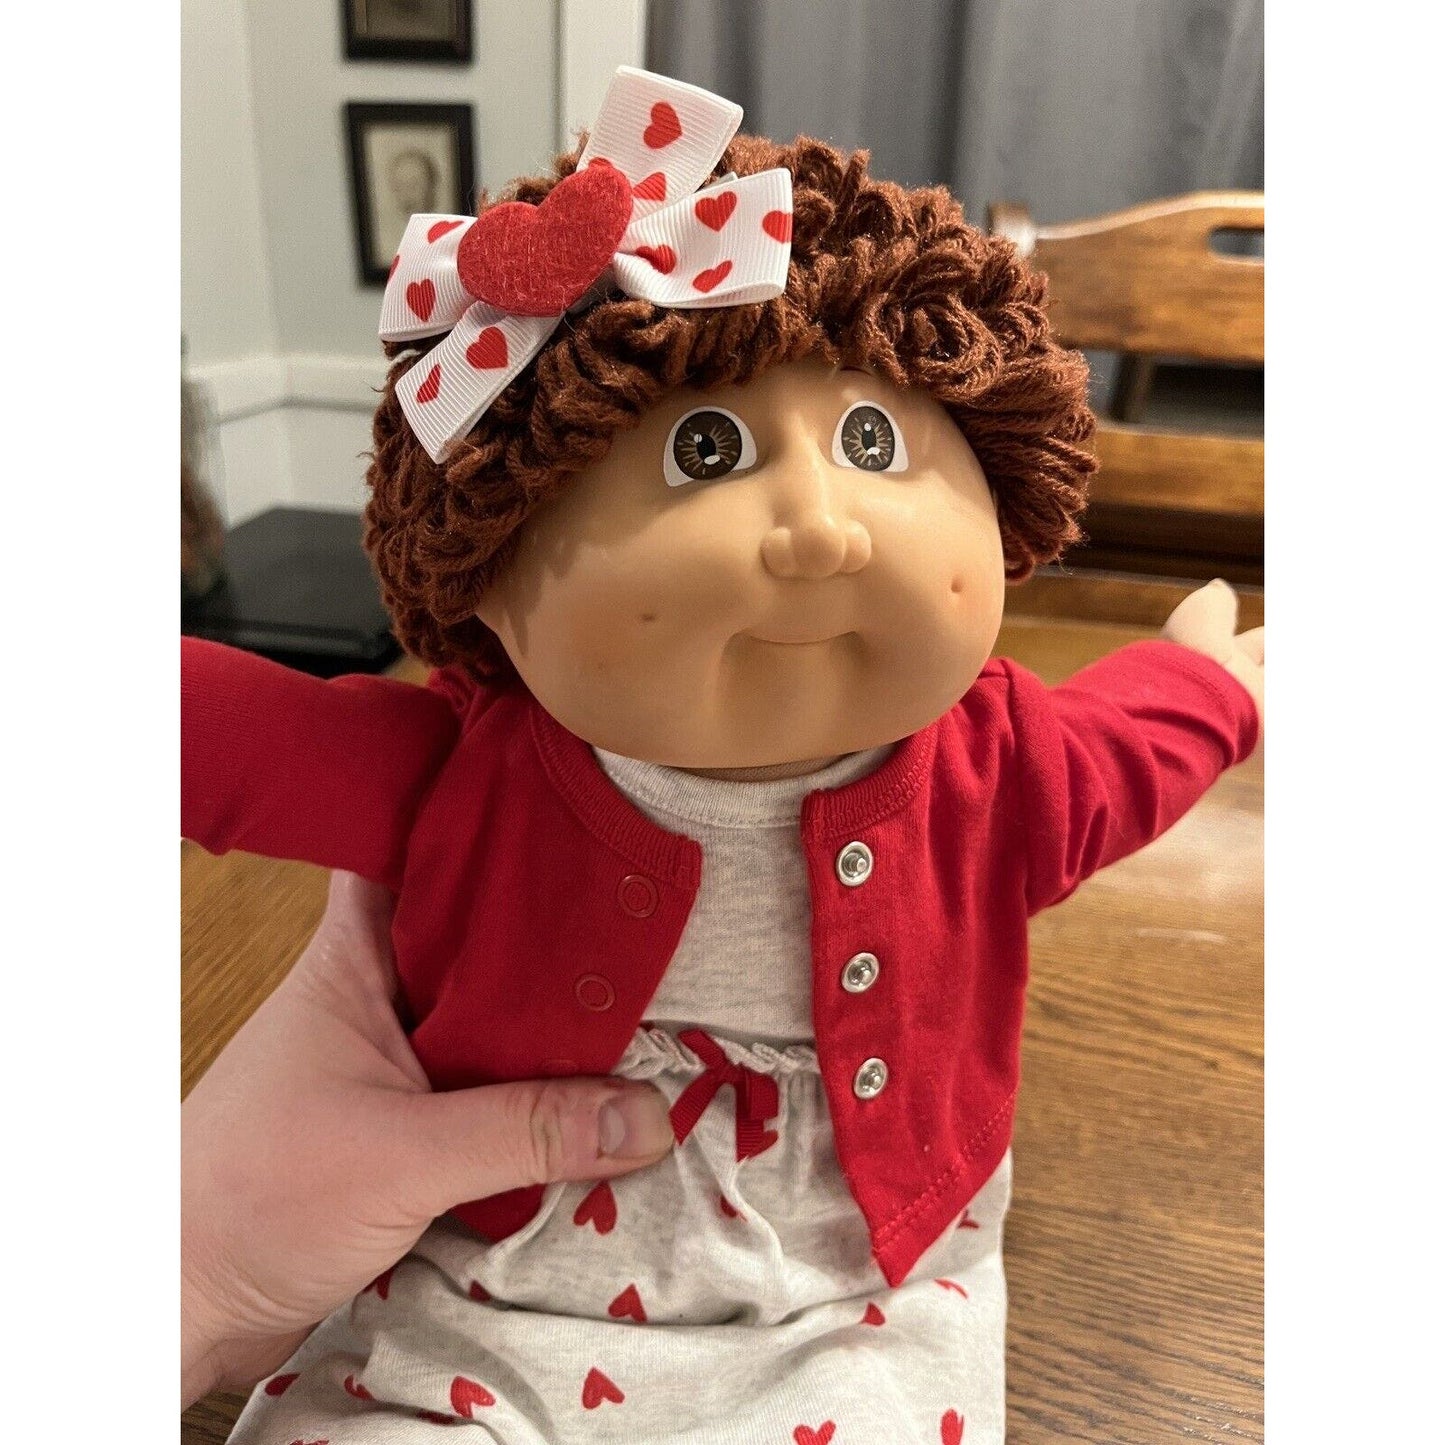 1980s Cabbage Patch Kid Brown Hair & Eyes Red Heart Valentine Dress & Cardigan